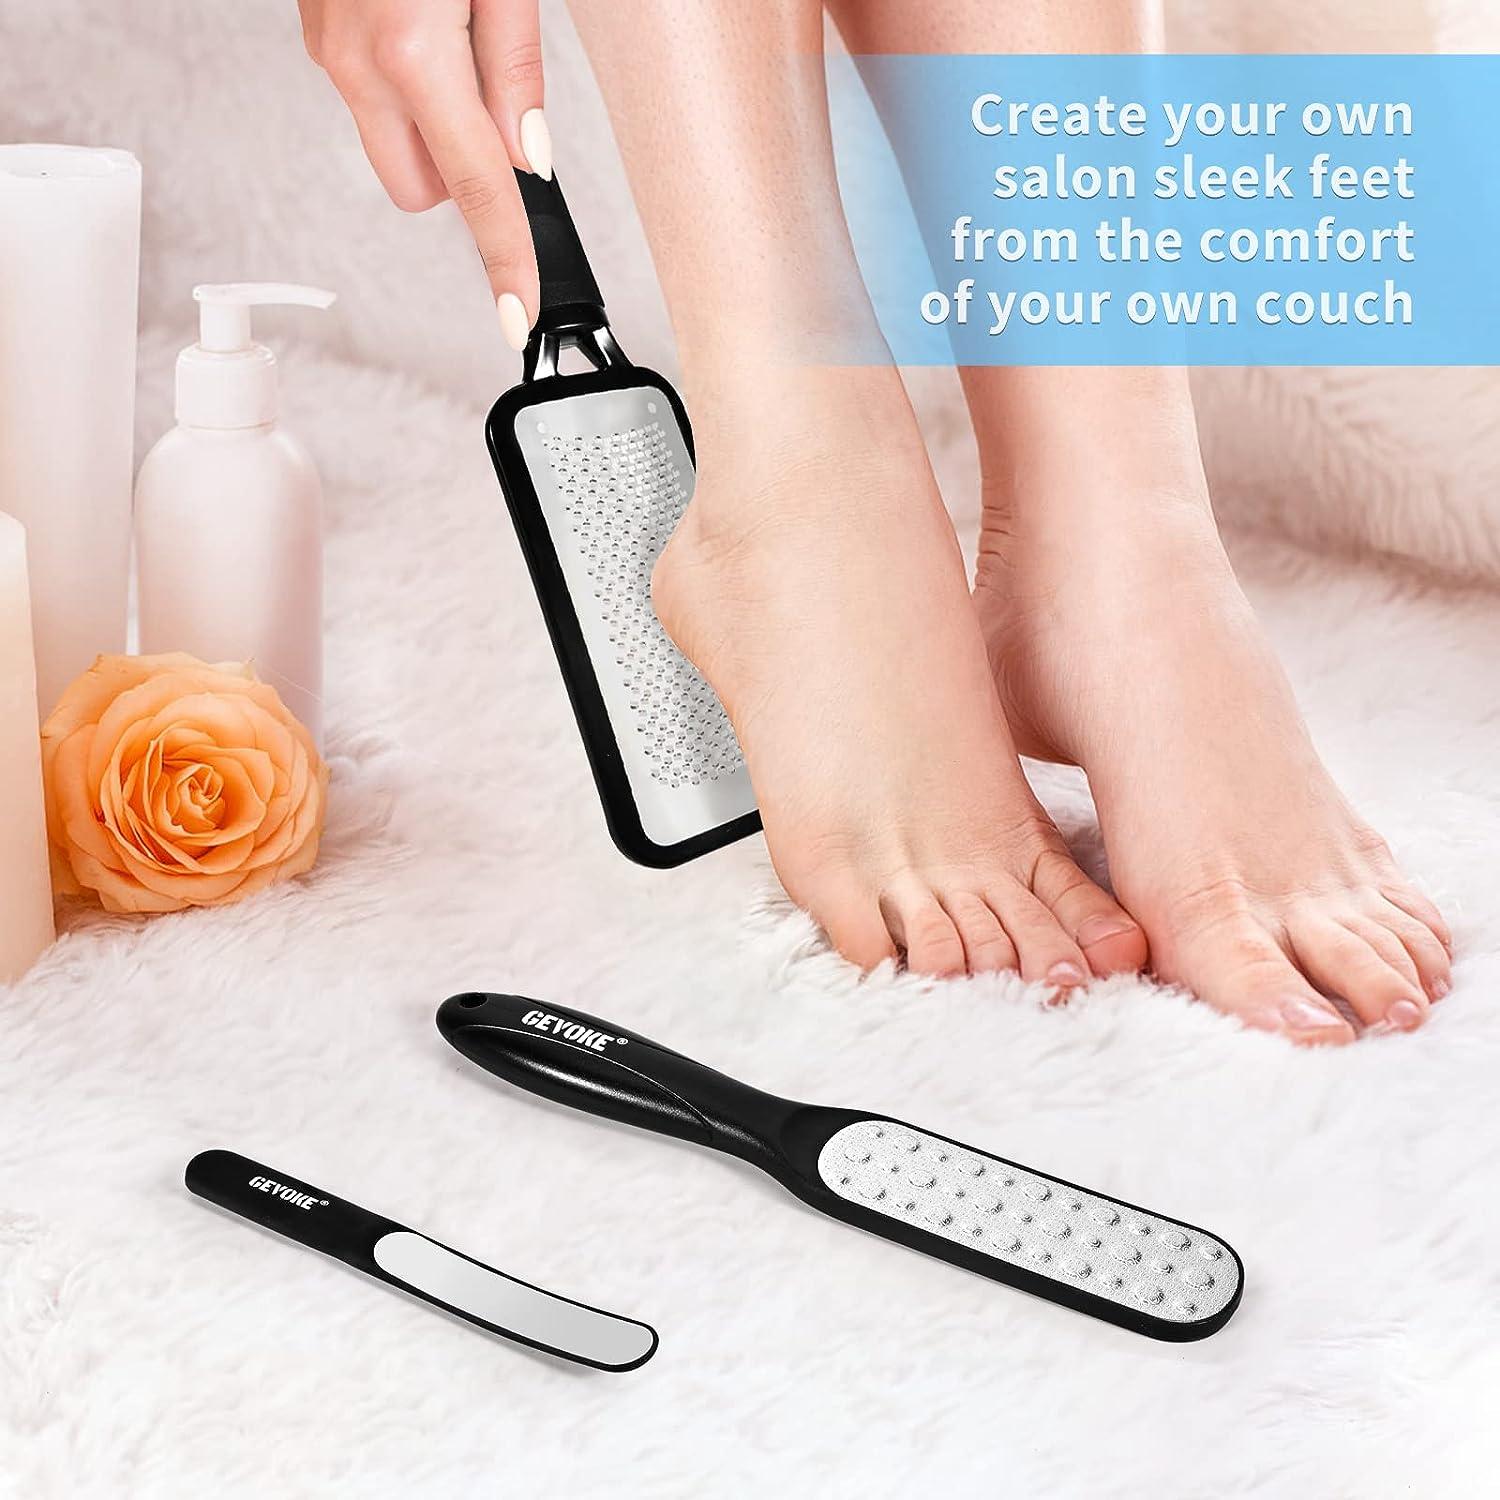 2 Pcs Stainless Steel Foot Scraper Metal Foot File Double Sided Foot File  Callus Remover Professiona